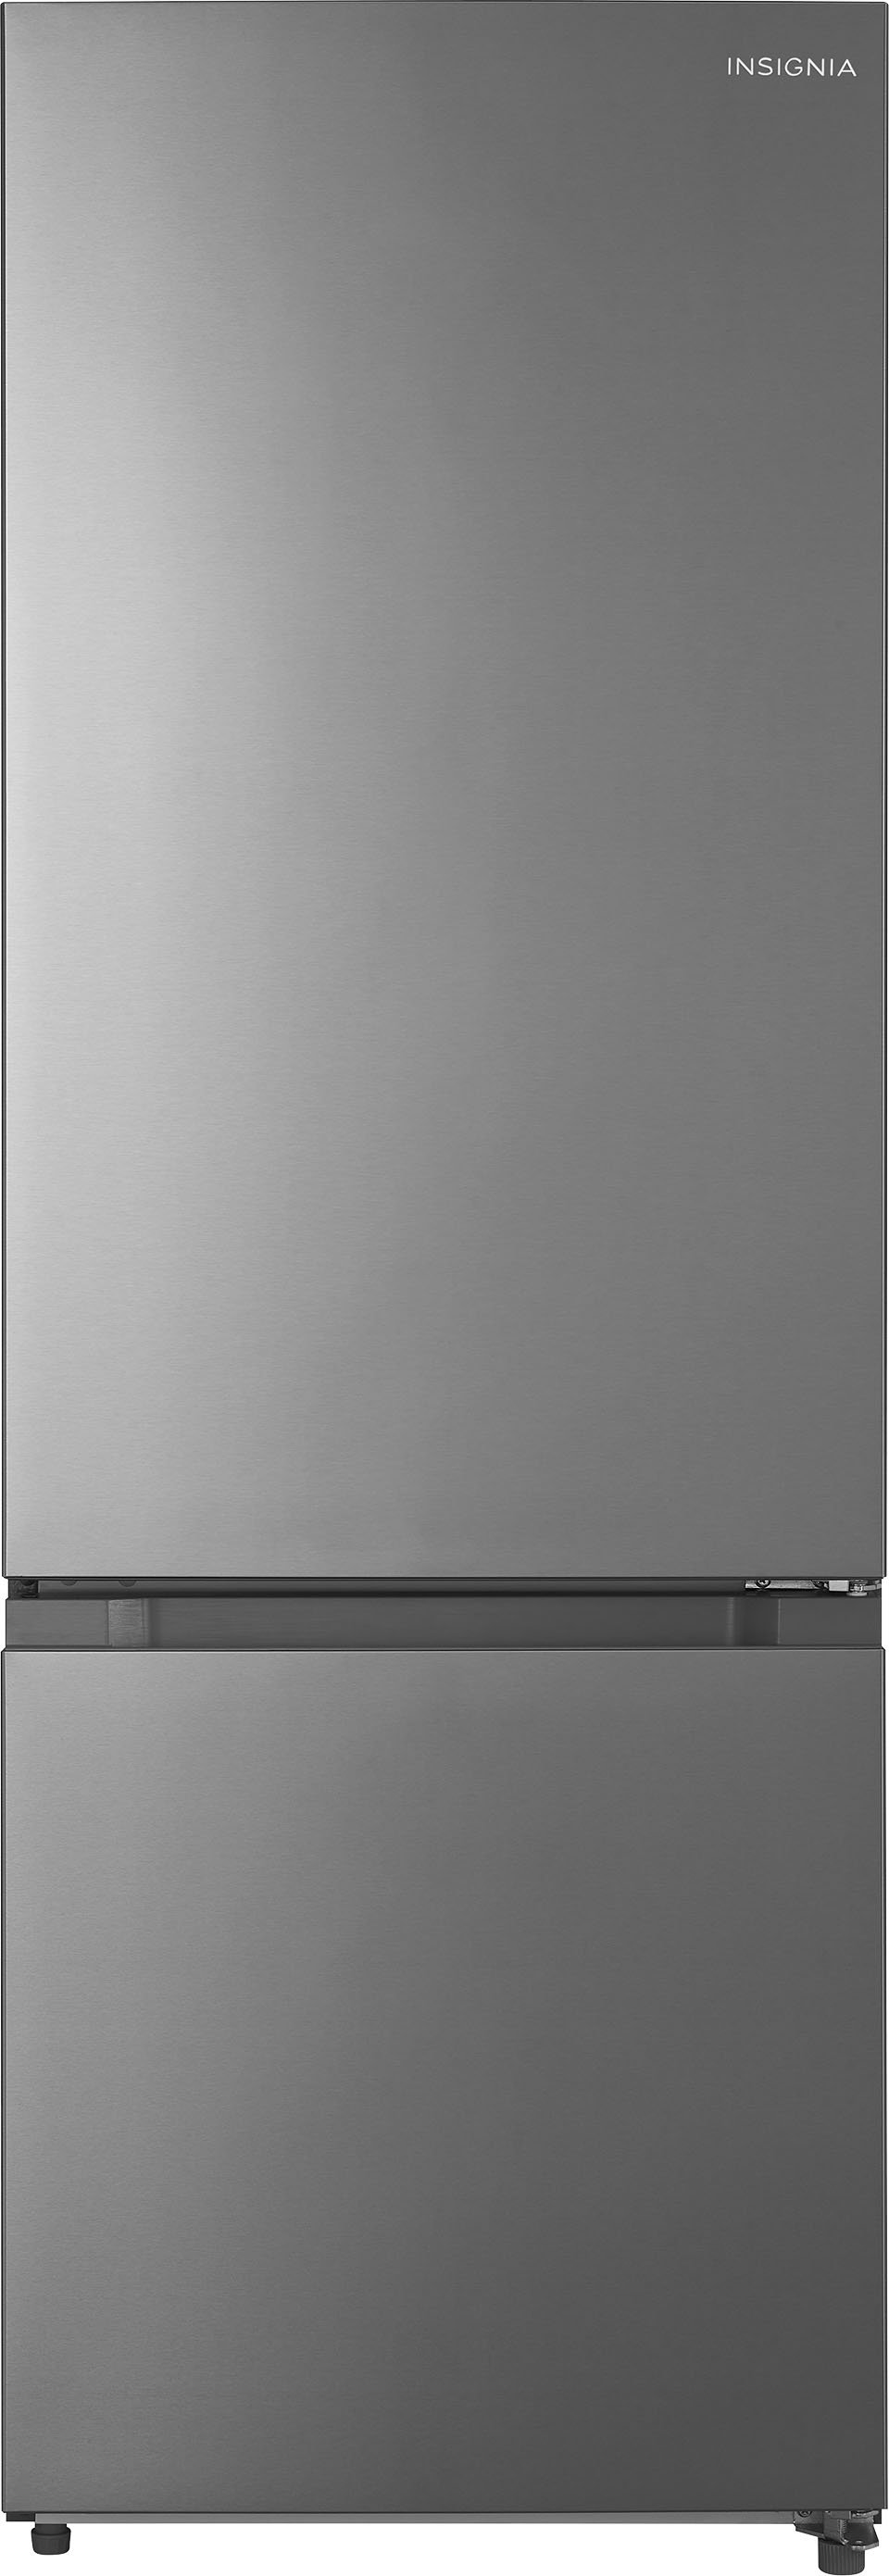 Insignia™ – 10.9 Cu. Ft. Bottom Mount Refrigerator – Stainless steel